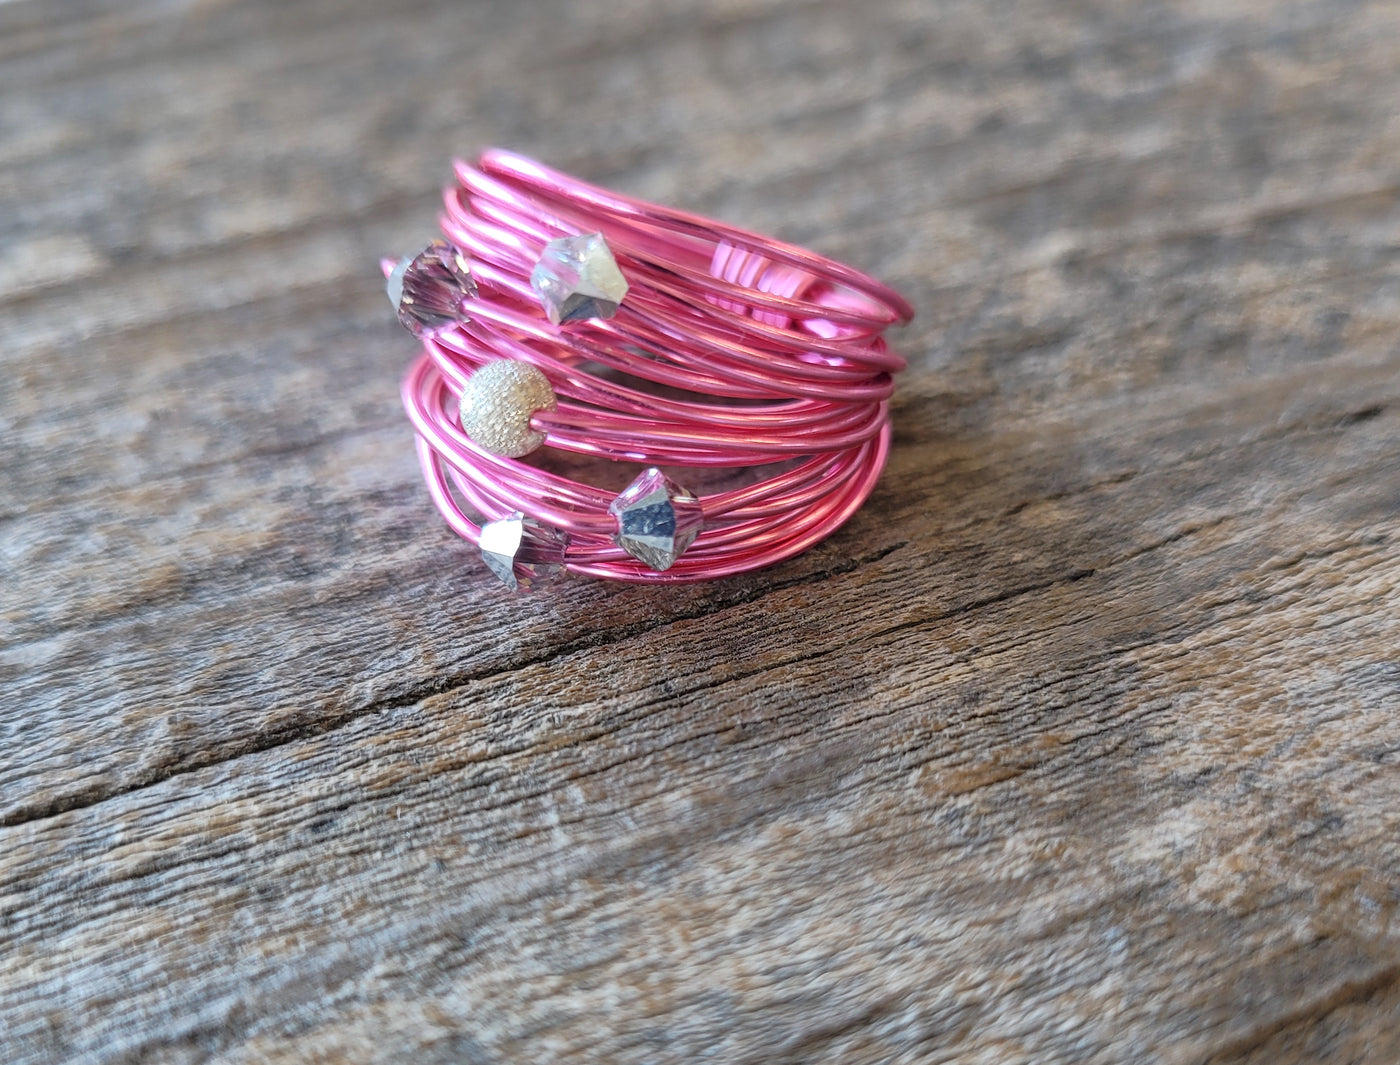 Marcia Hot Pink Wire Wrap Ring with Grey Swarovski Crystals